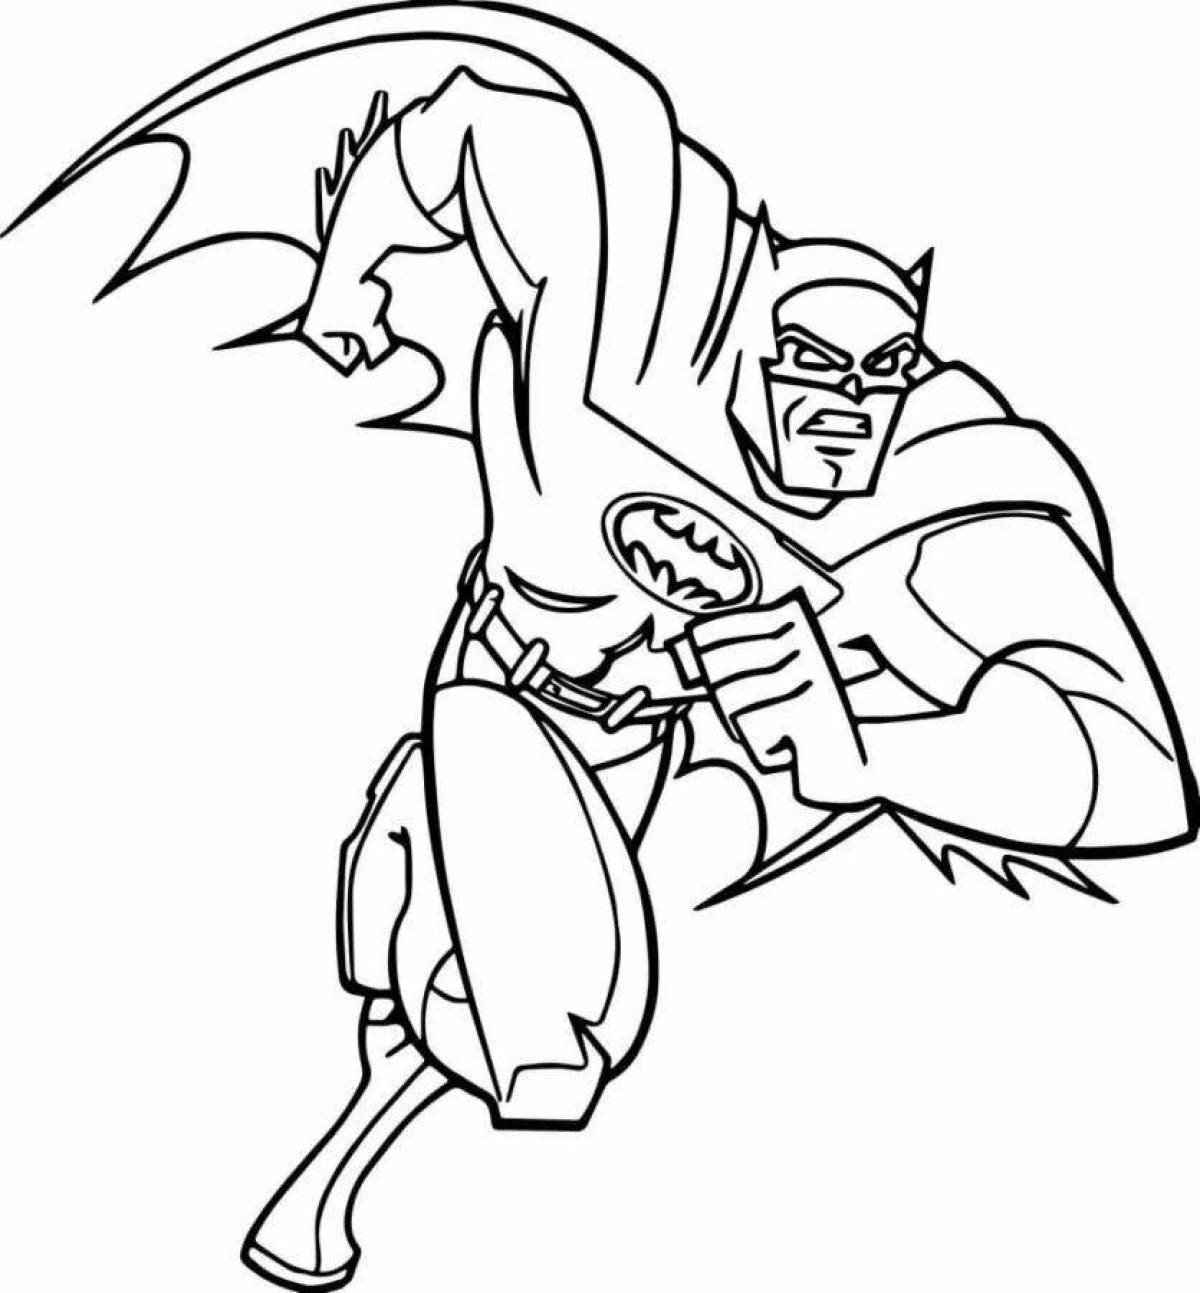 Disgusting villains coloring pages